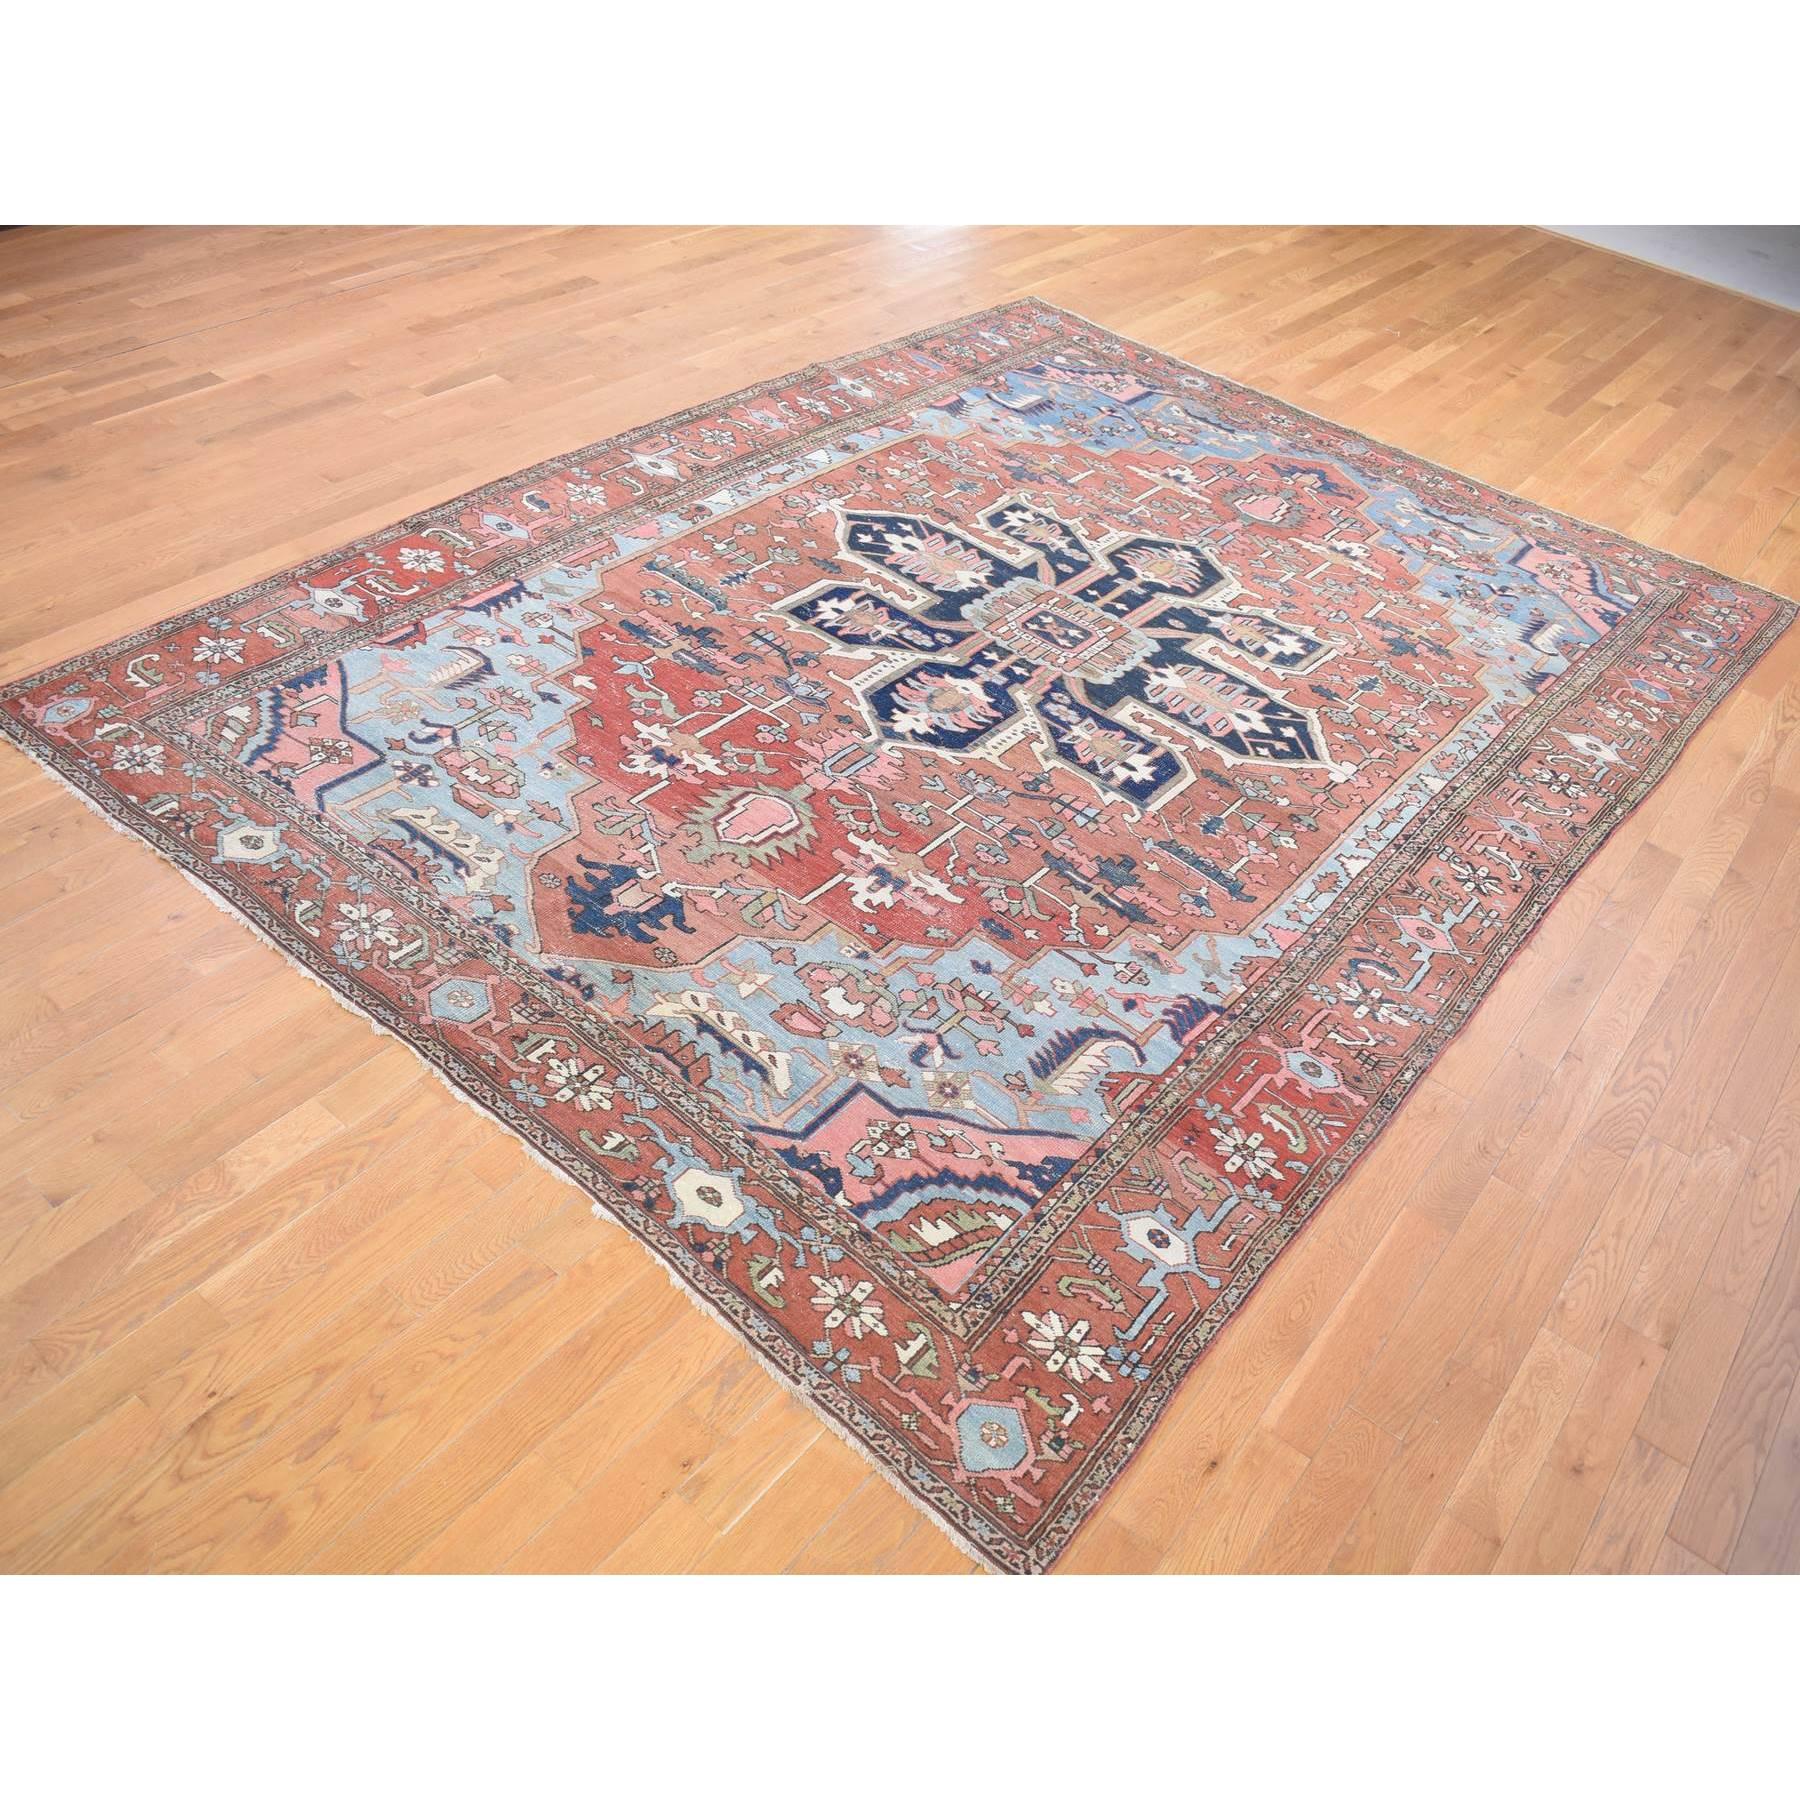 This fabulous hand-knotted carpet has been created and designed for extra strength and durability. This rug has been handcrafted for weeks in the traditional method that is used to make
Exact rug size in feet and inches : 8'7